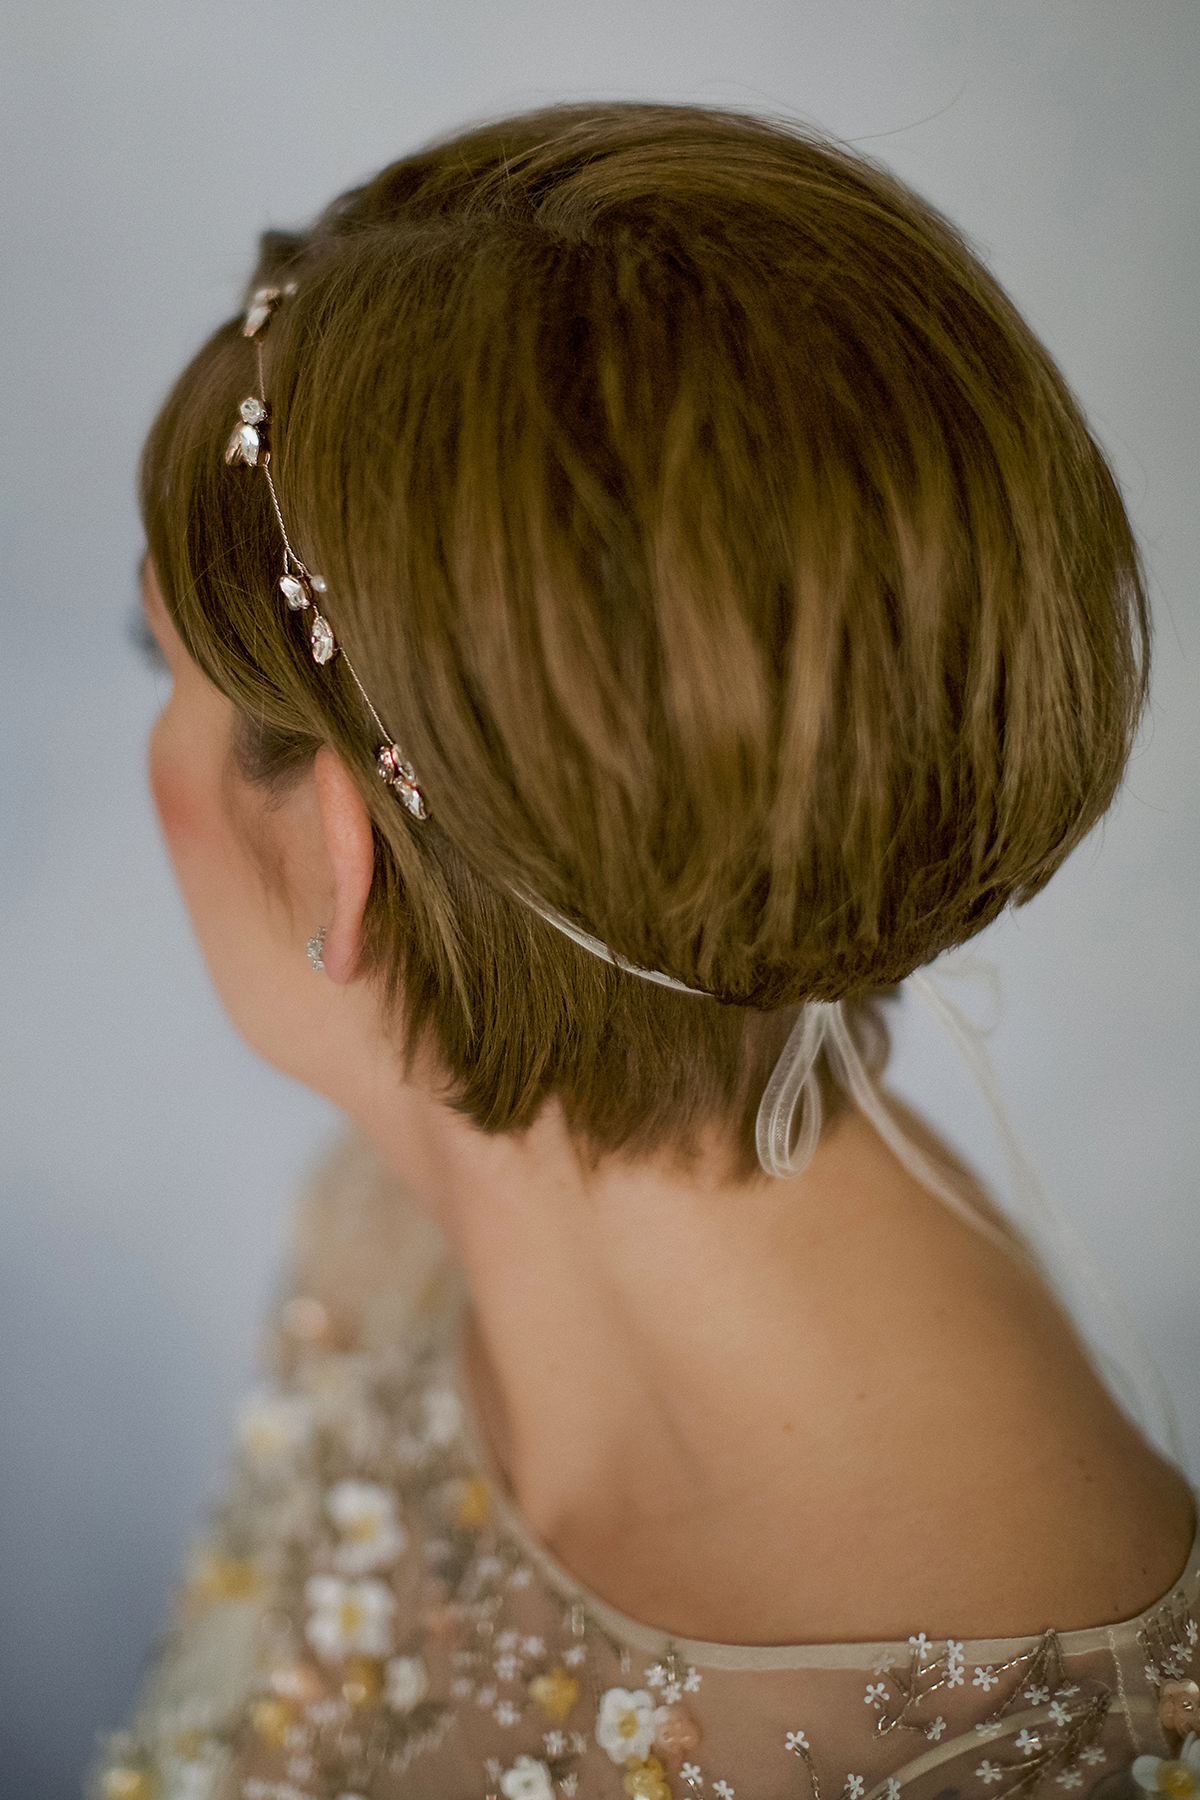 How To Style Wedding Hair Accessories With Short Hair